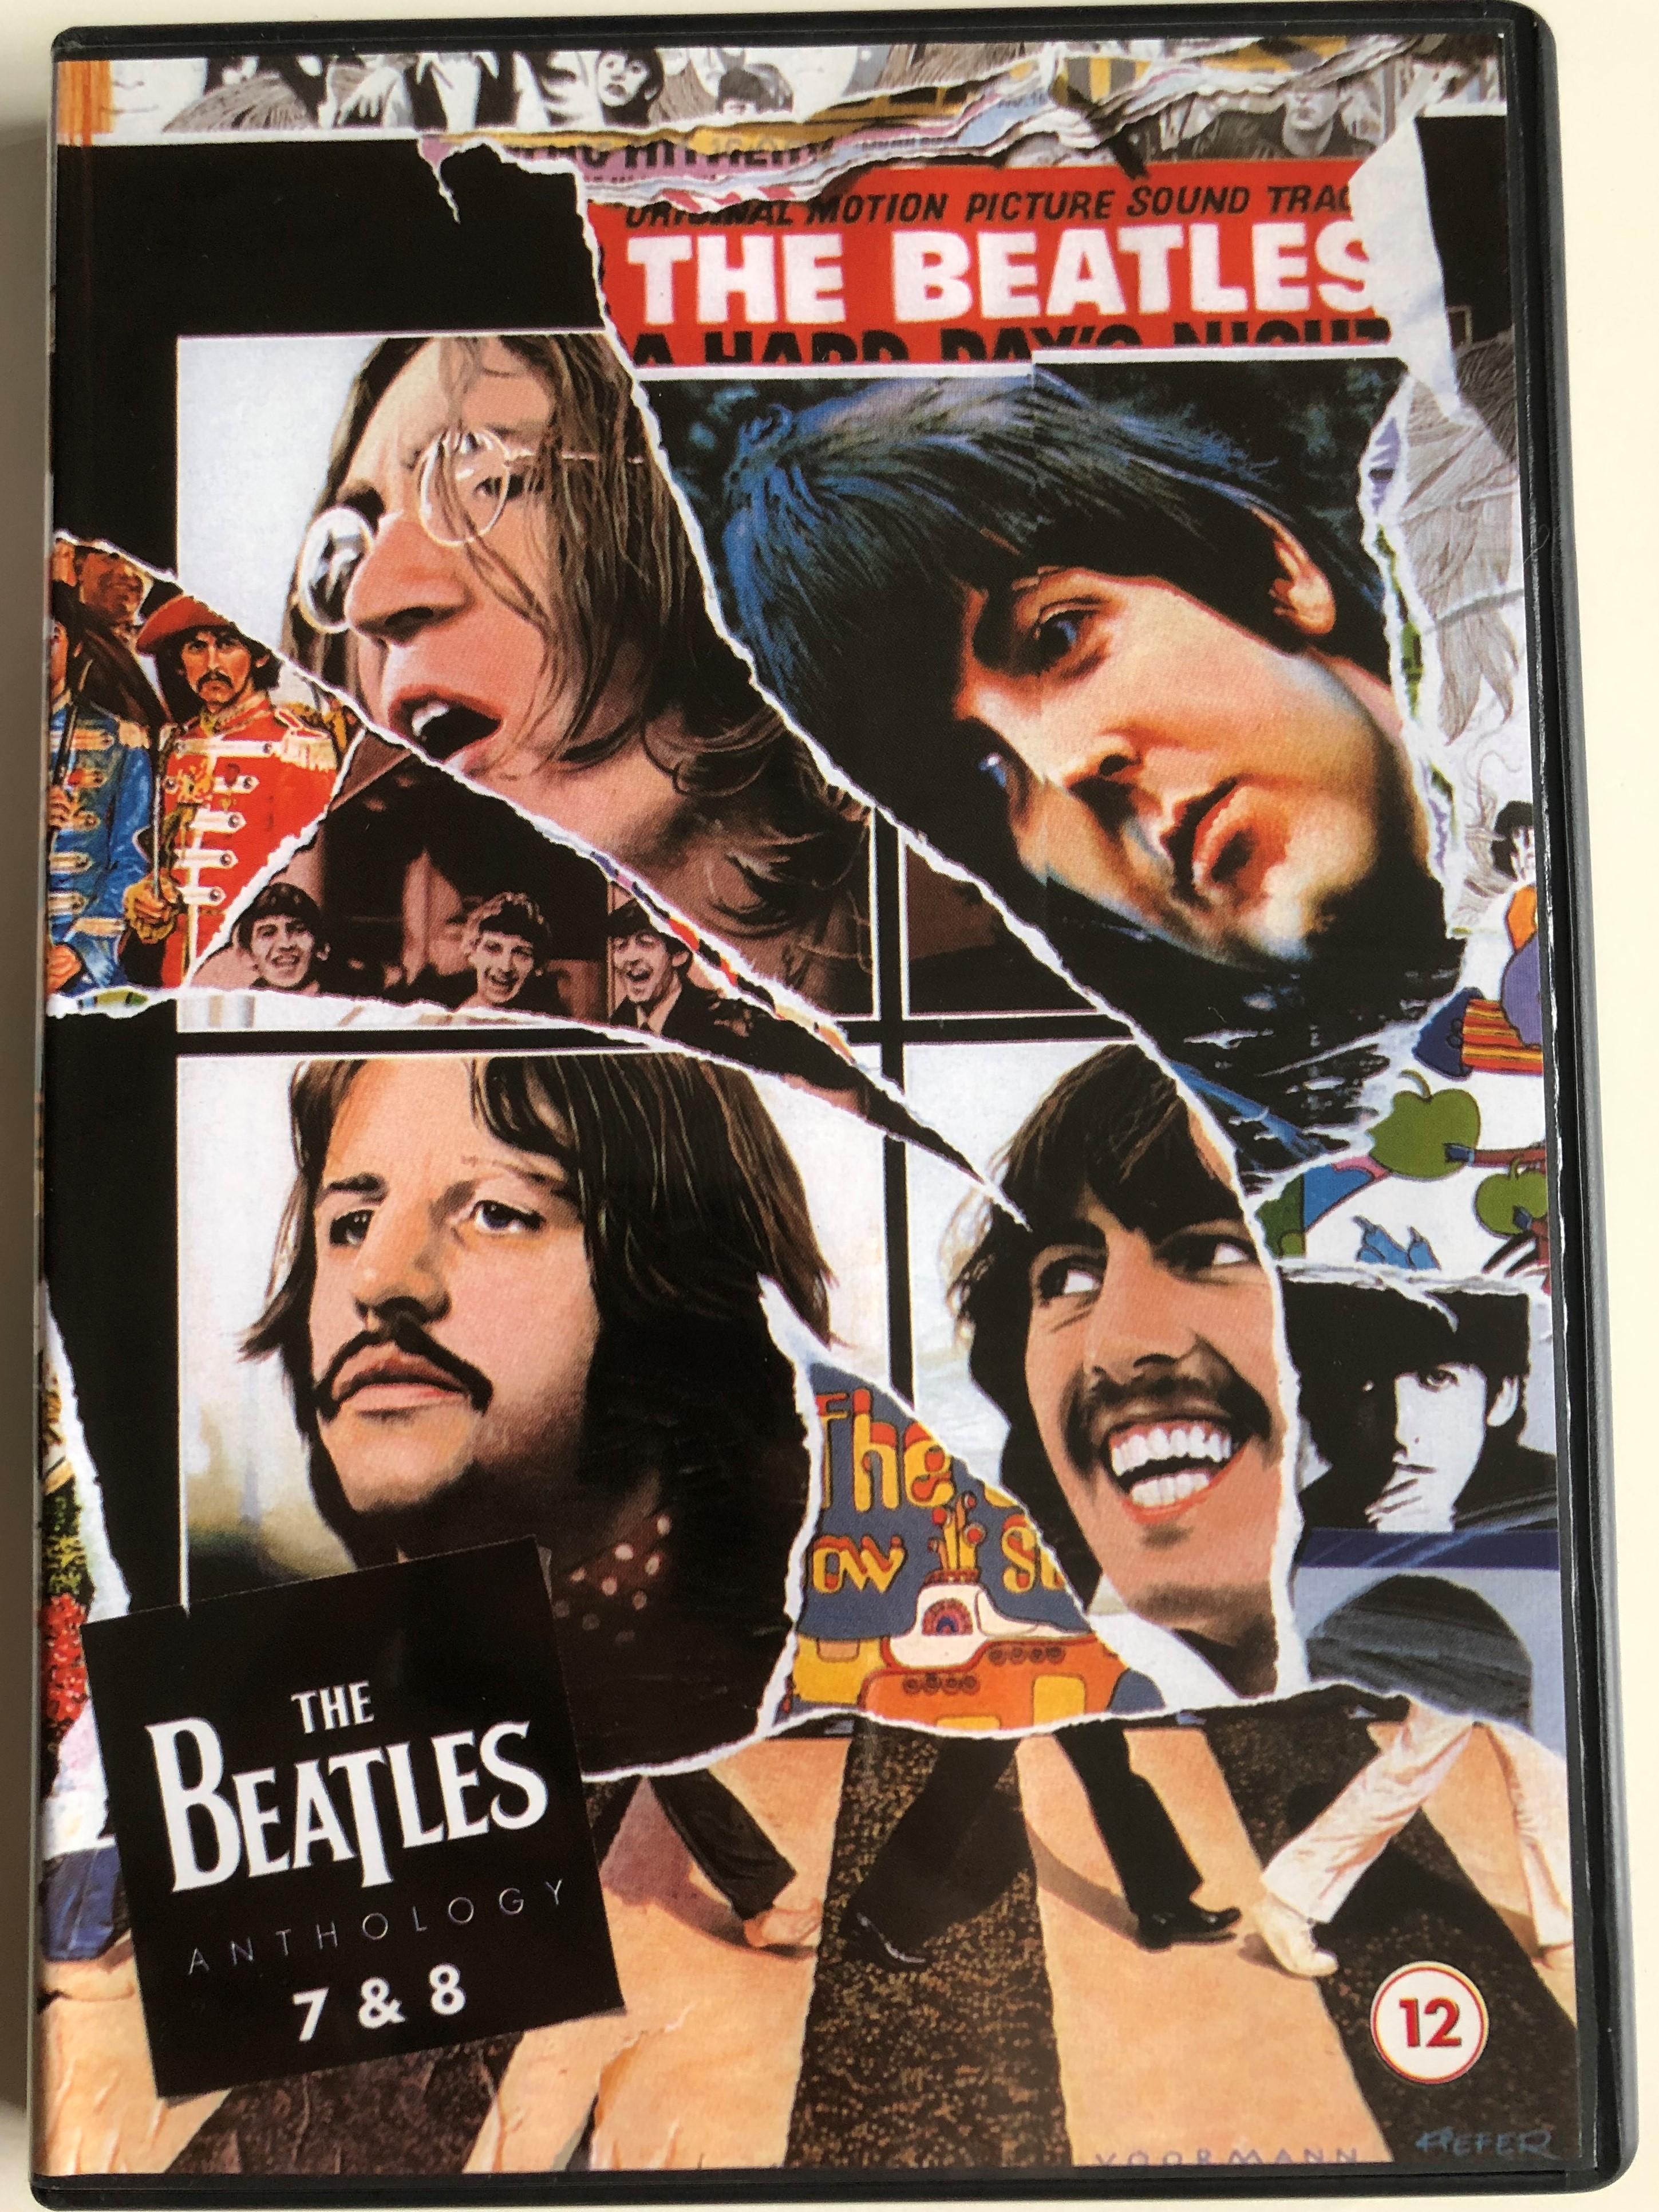 The Beatles Anthology 7 & 8 DVD 2003 / Episodes 7, 8 / Directed by Geoff  Wonfor / Apple Records / 2 Episodes - Bible in My Language